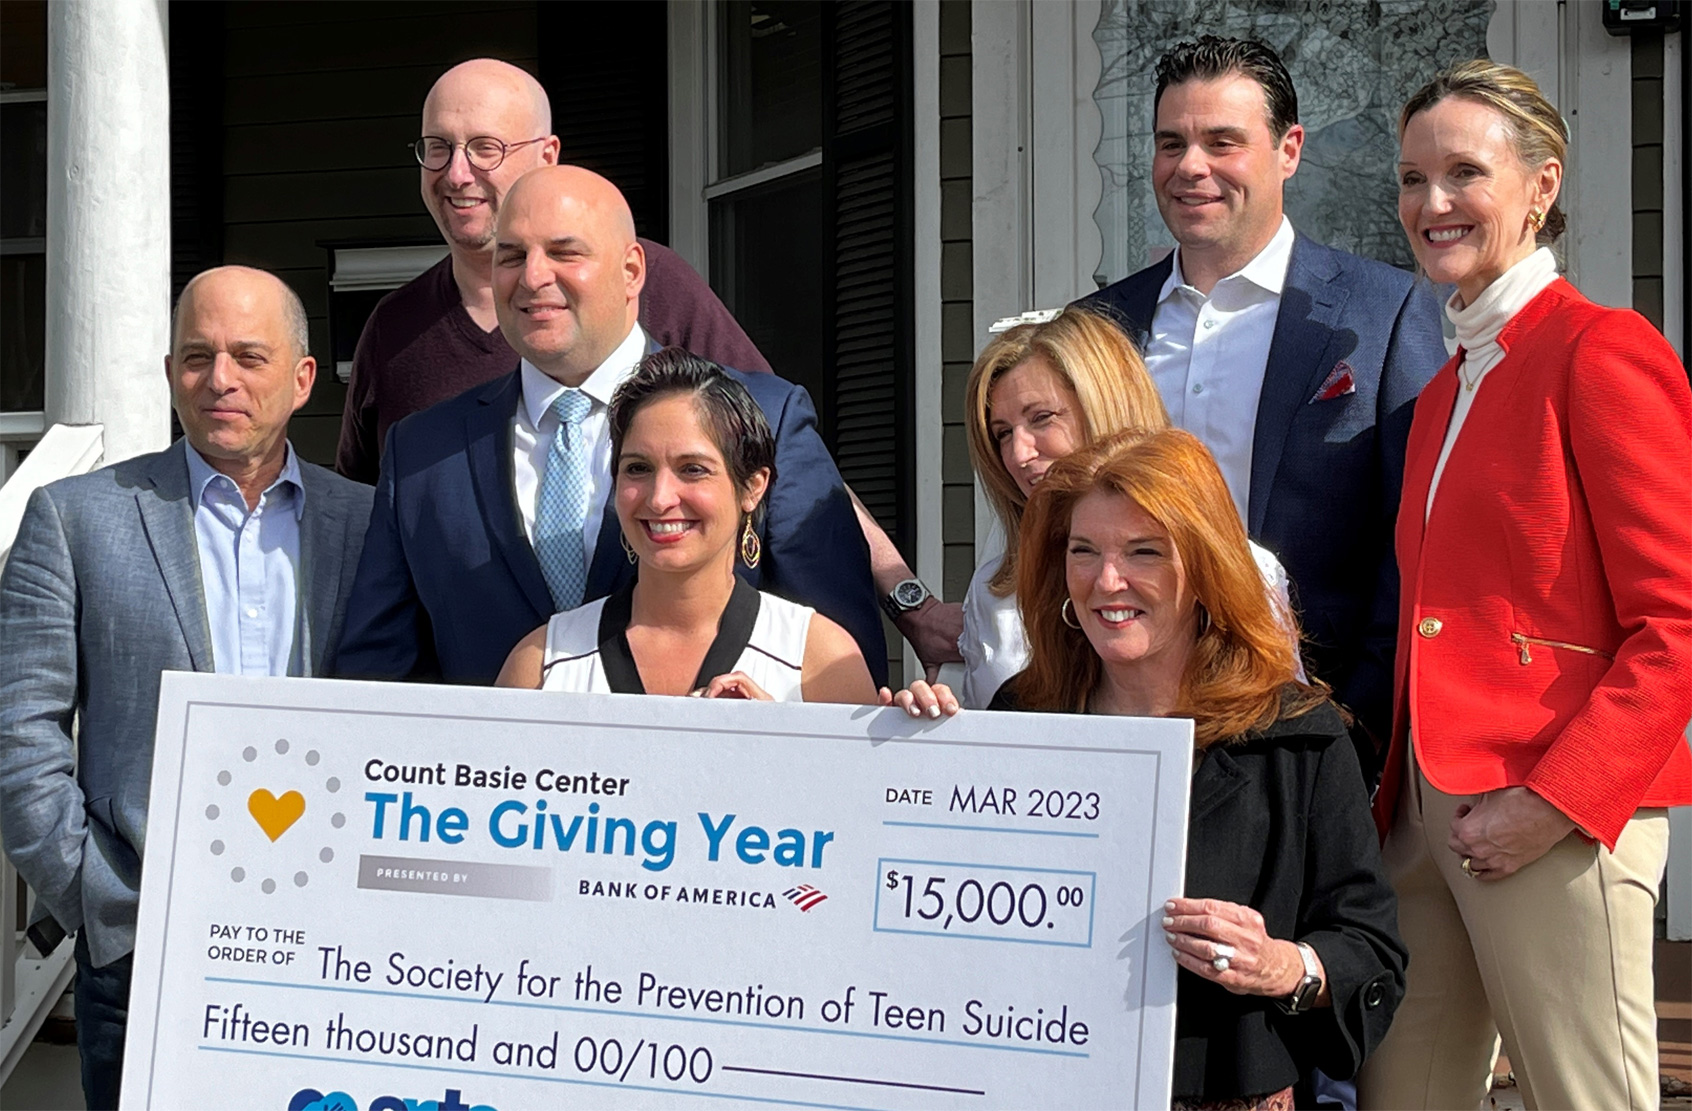 Count Basie Center and Bank of America officials recognize the Society For The Prevention Of Teen Suicide during THE GIVING YEAR initiative